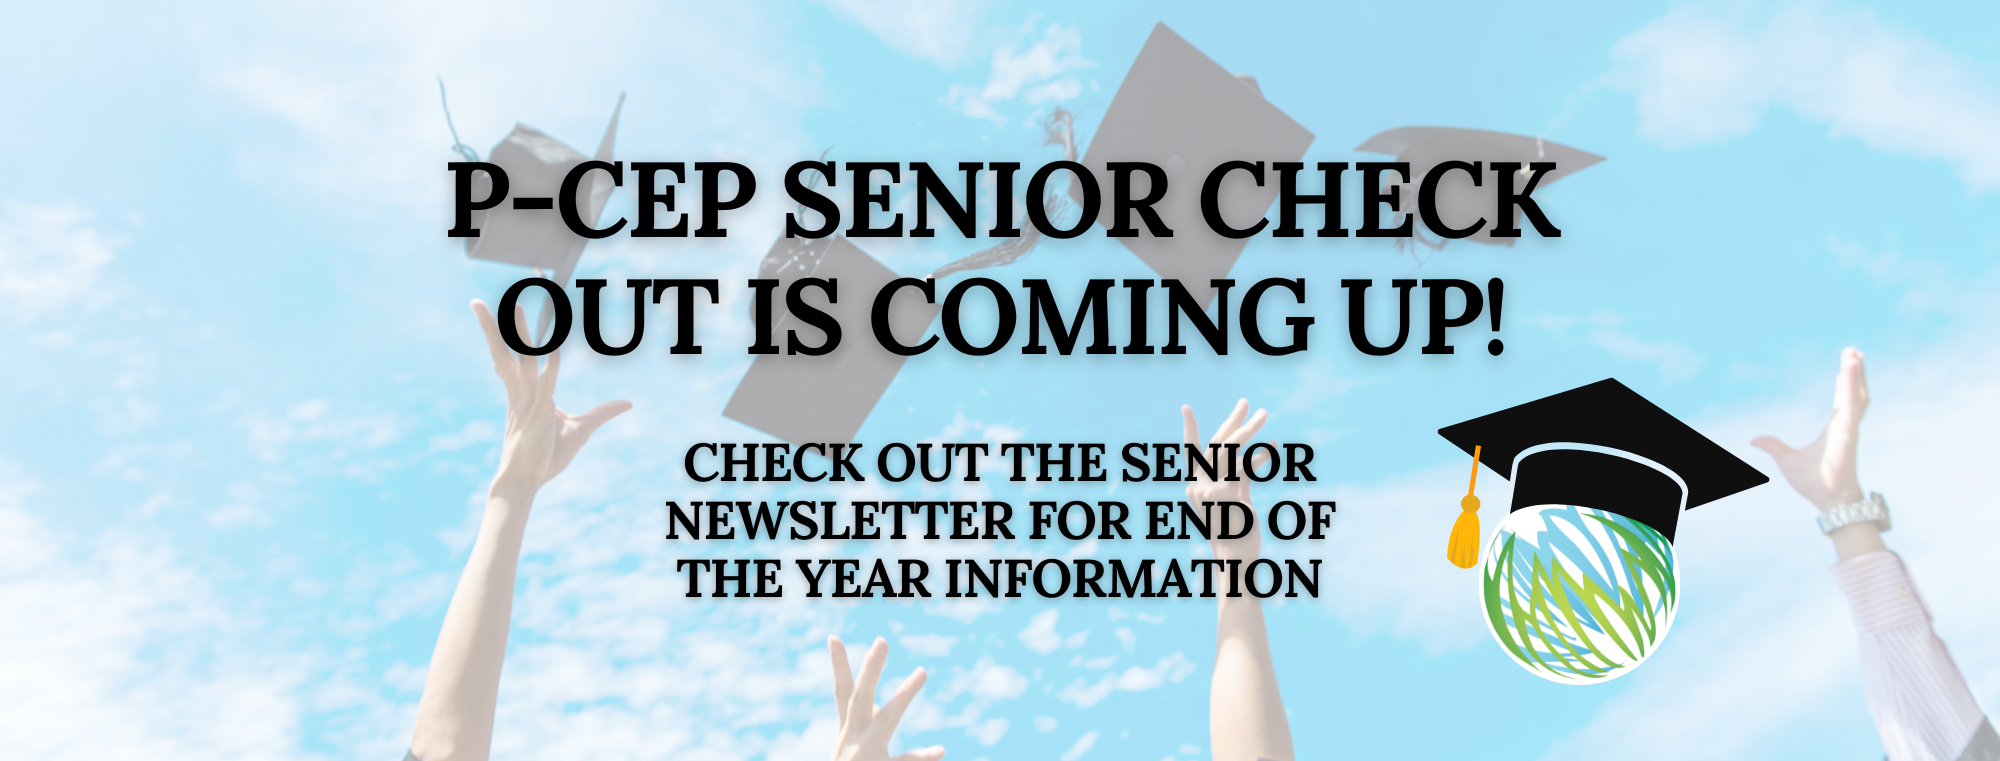 P-CEP Senior Check Out is Coming Up! Check out the senior newsletter for end of the year information